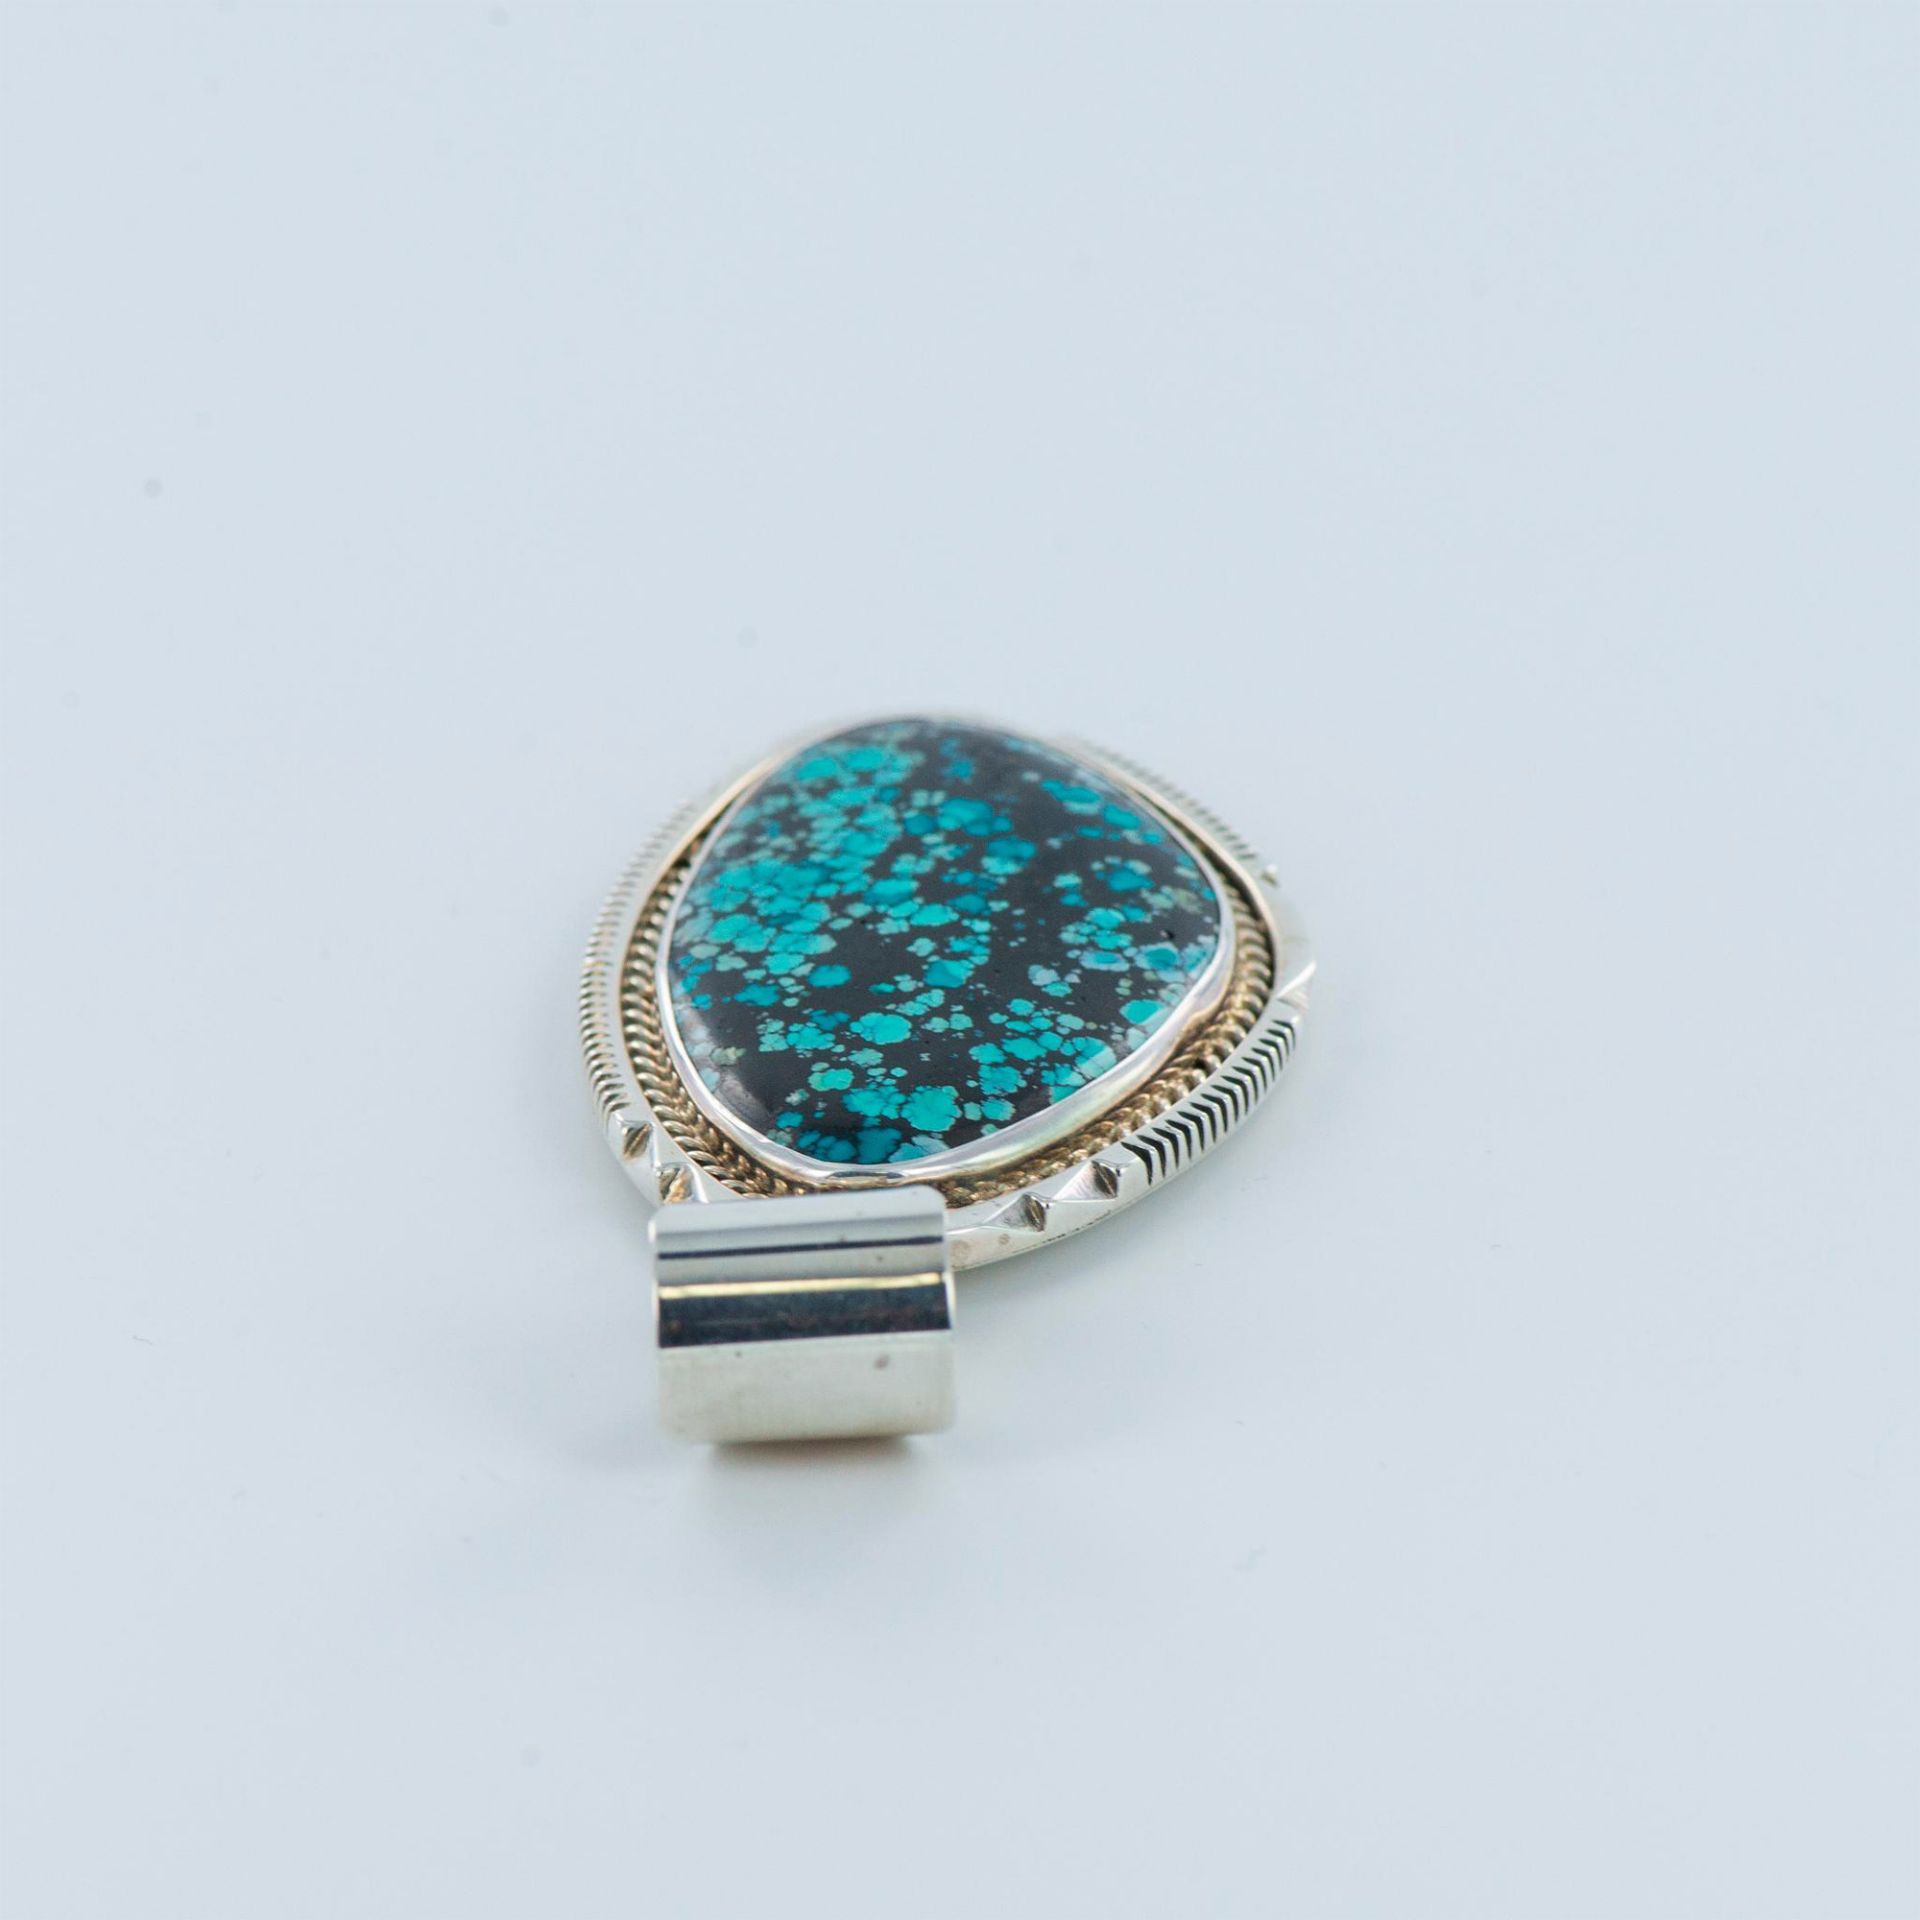 Bill Mex Dineh Sterling Silver and Turquoise Pendant - Bild 4 aus 7